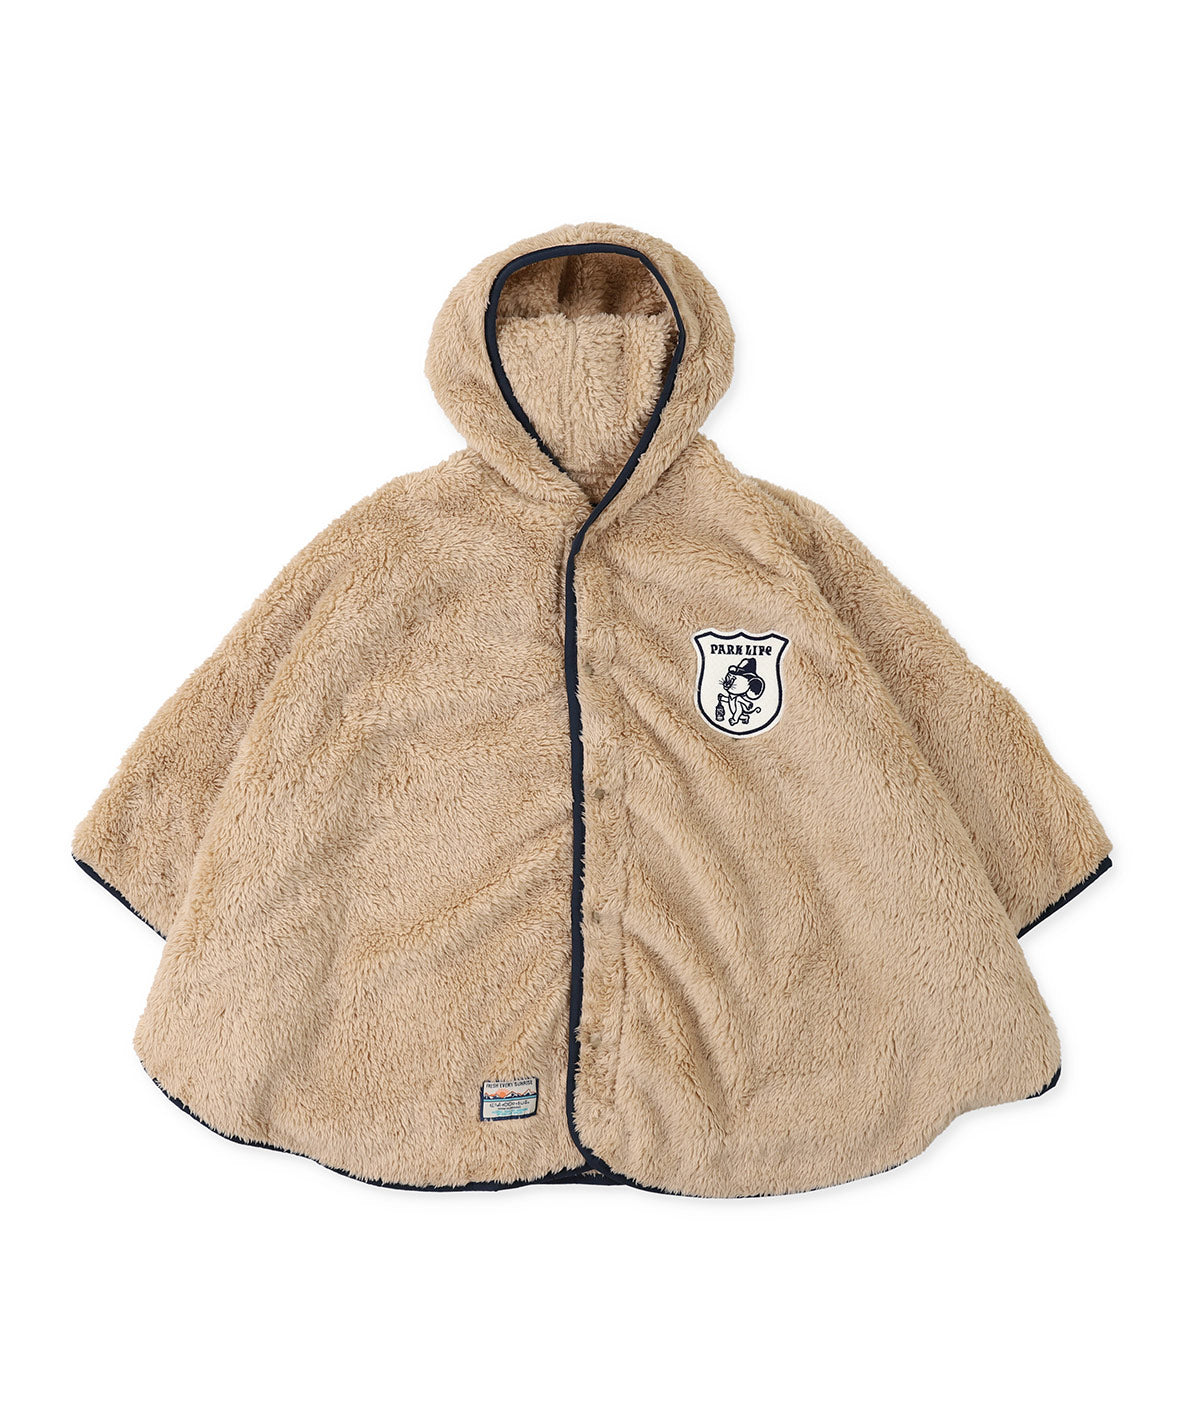 JERRY MARQUEZ Packable Boa Fleece Poncho – FITH ONLINE STORE